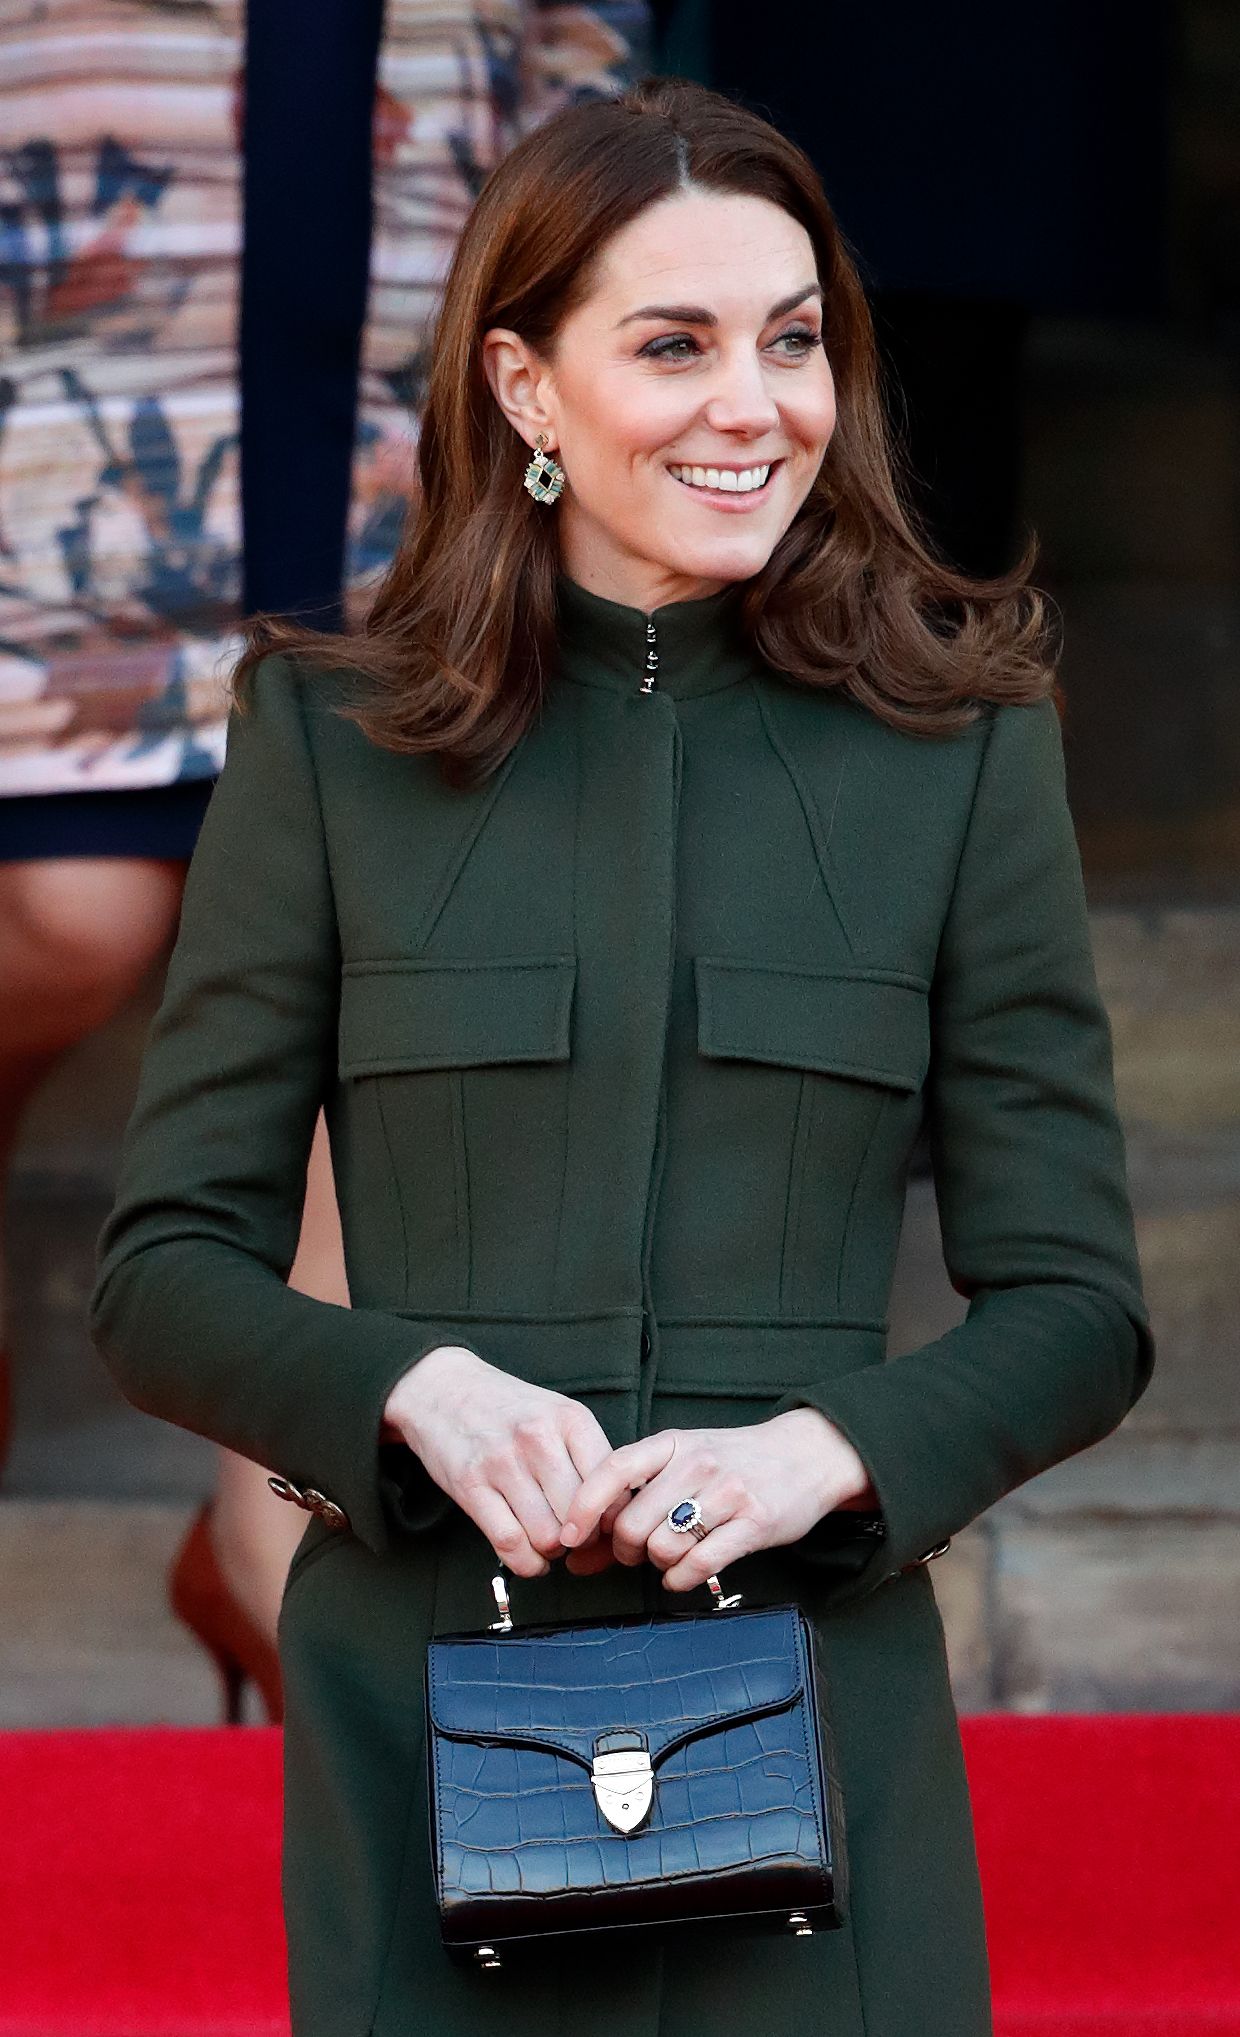 Royals’ greatest fall outfits